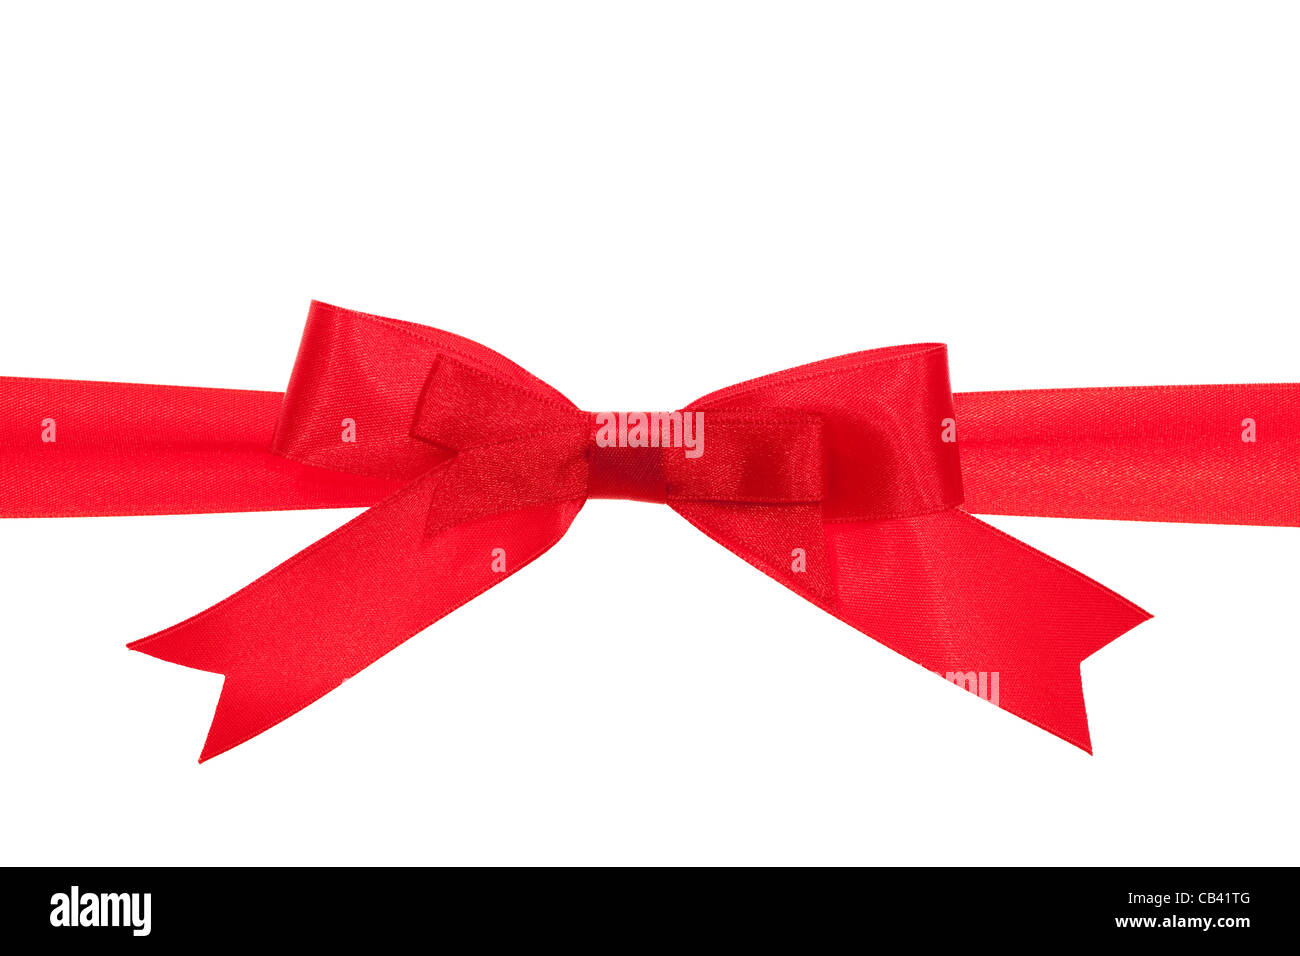 red ribbon with red bow on gift Stock Photo